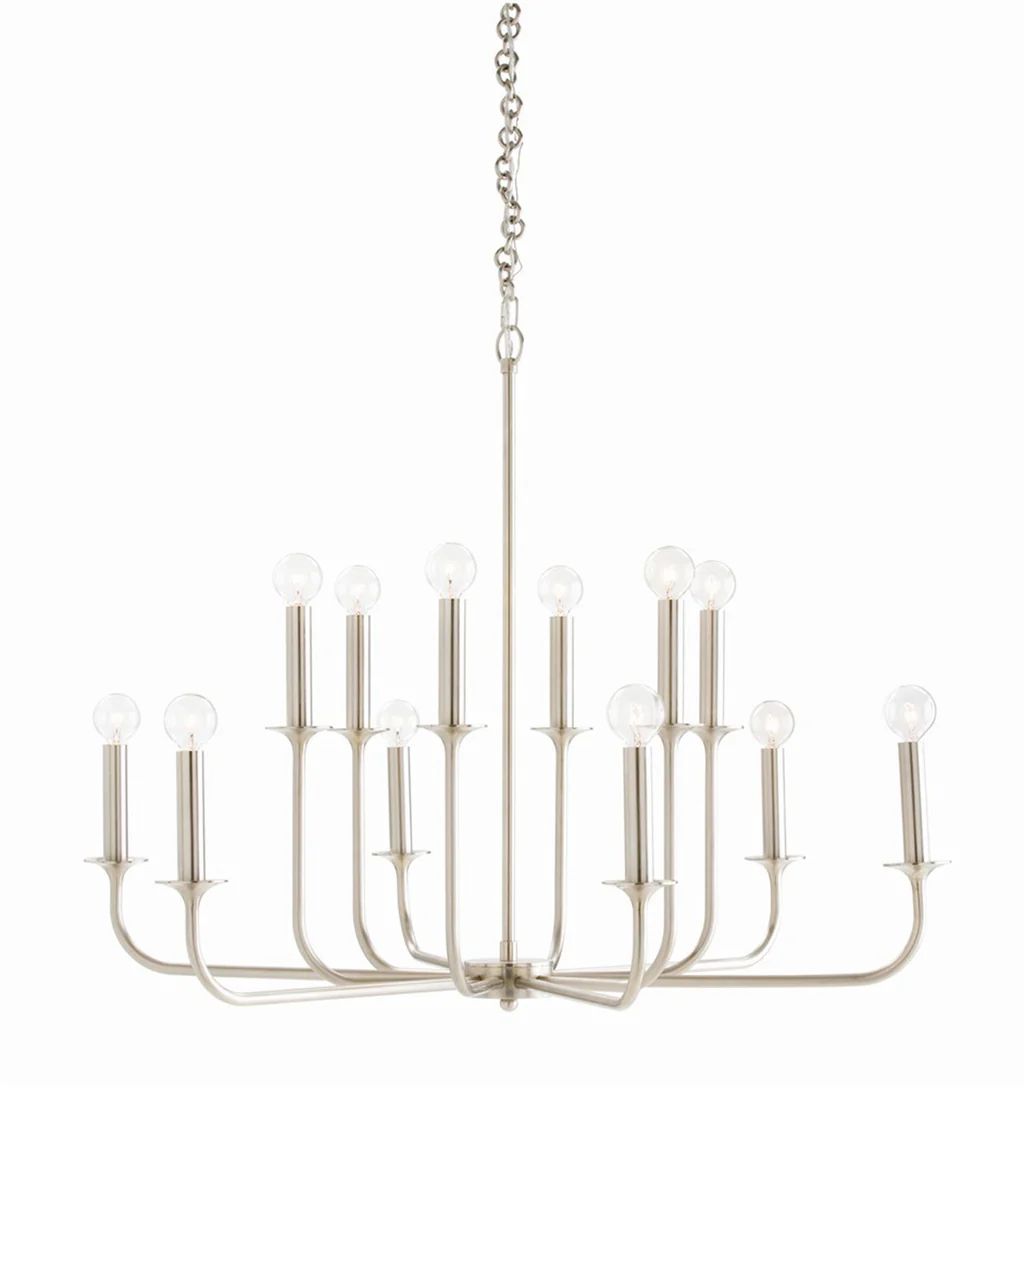 Breck Chandelier | McGee & Co.